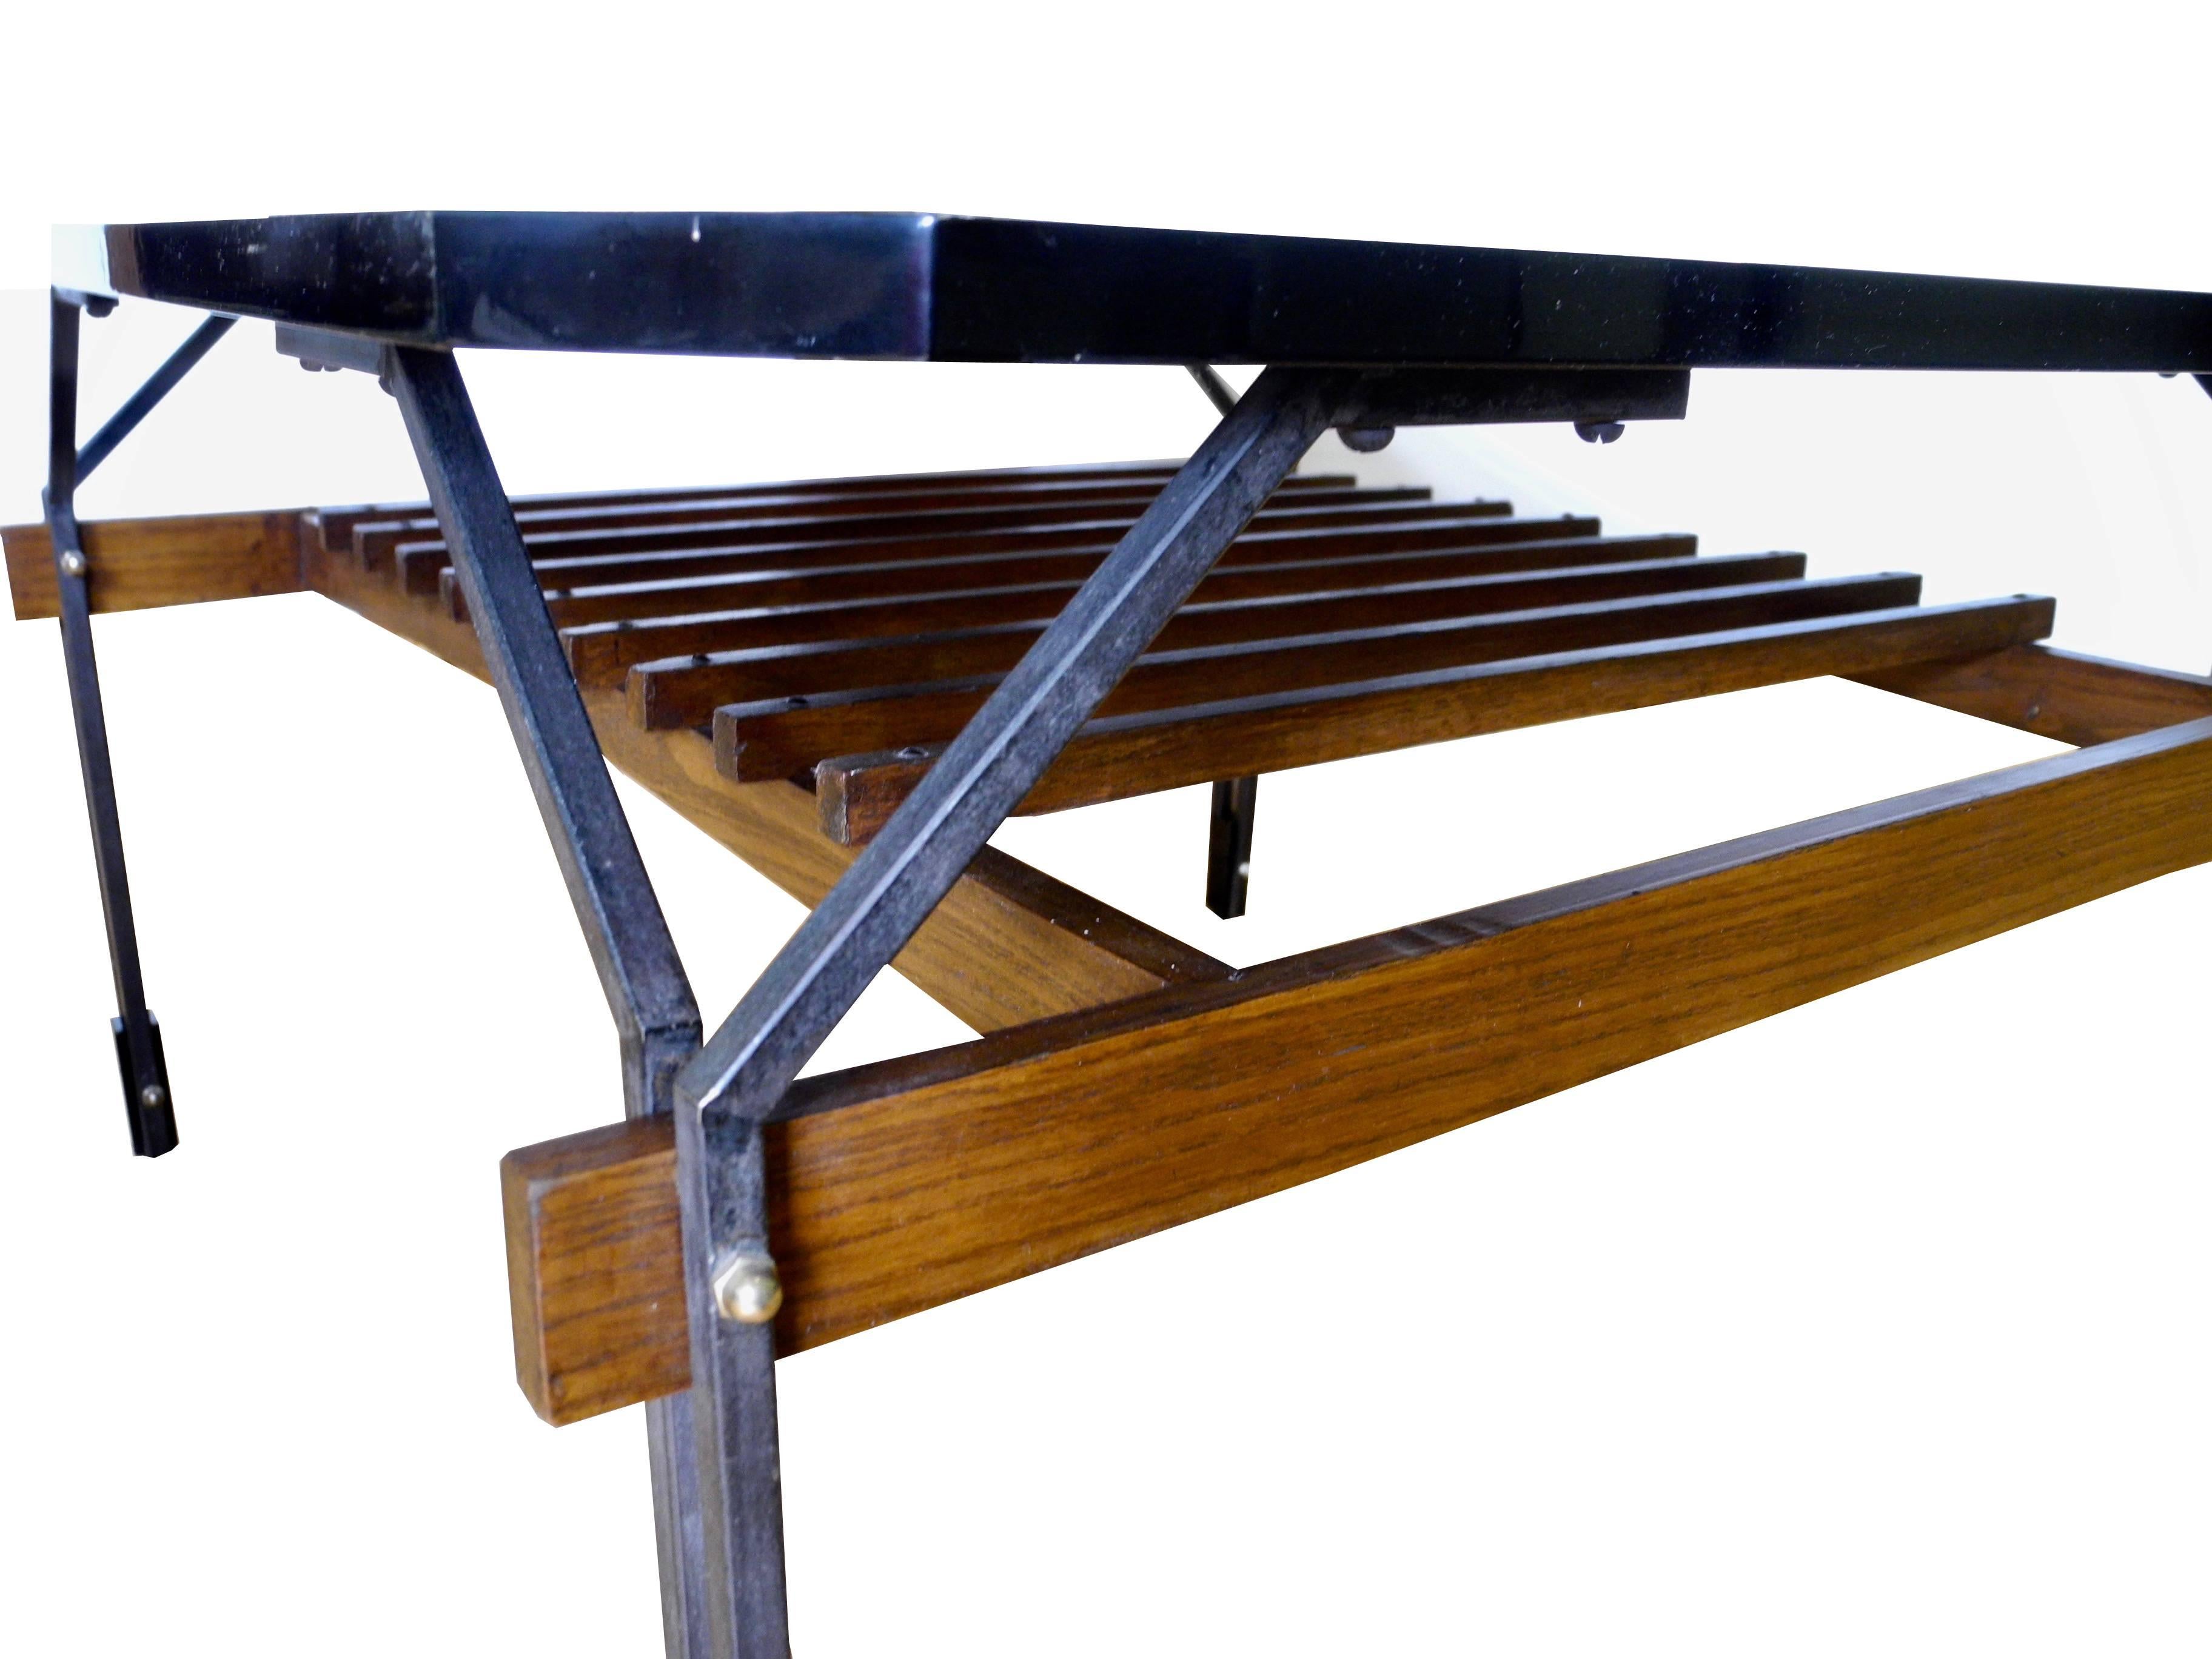 20th Century Rosewood and Lacquer Two-Tier Coffee Table by Jianfranco Frattini, Italy For Sale